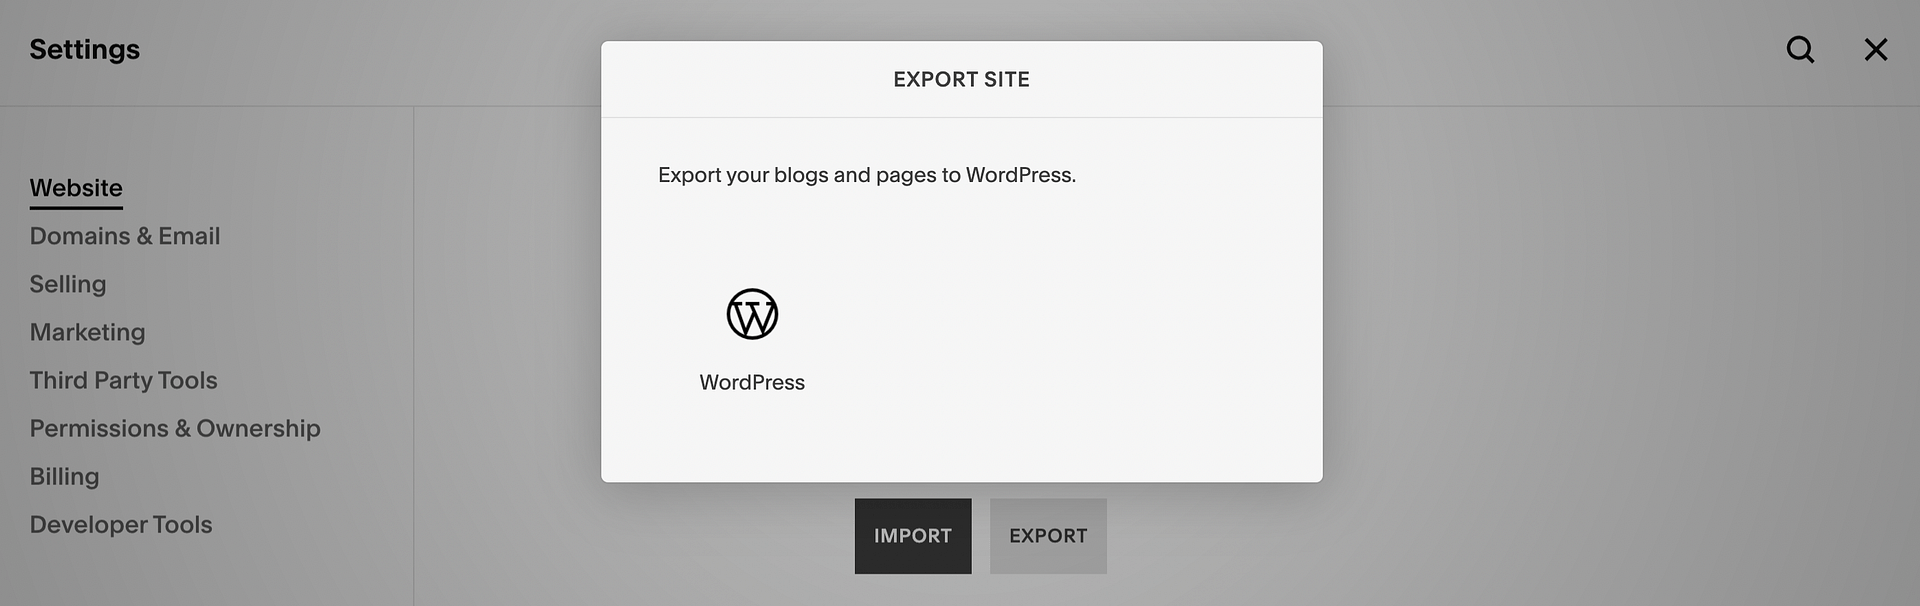 Select WordPress for exporting content from Squarespace